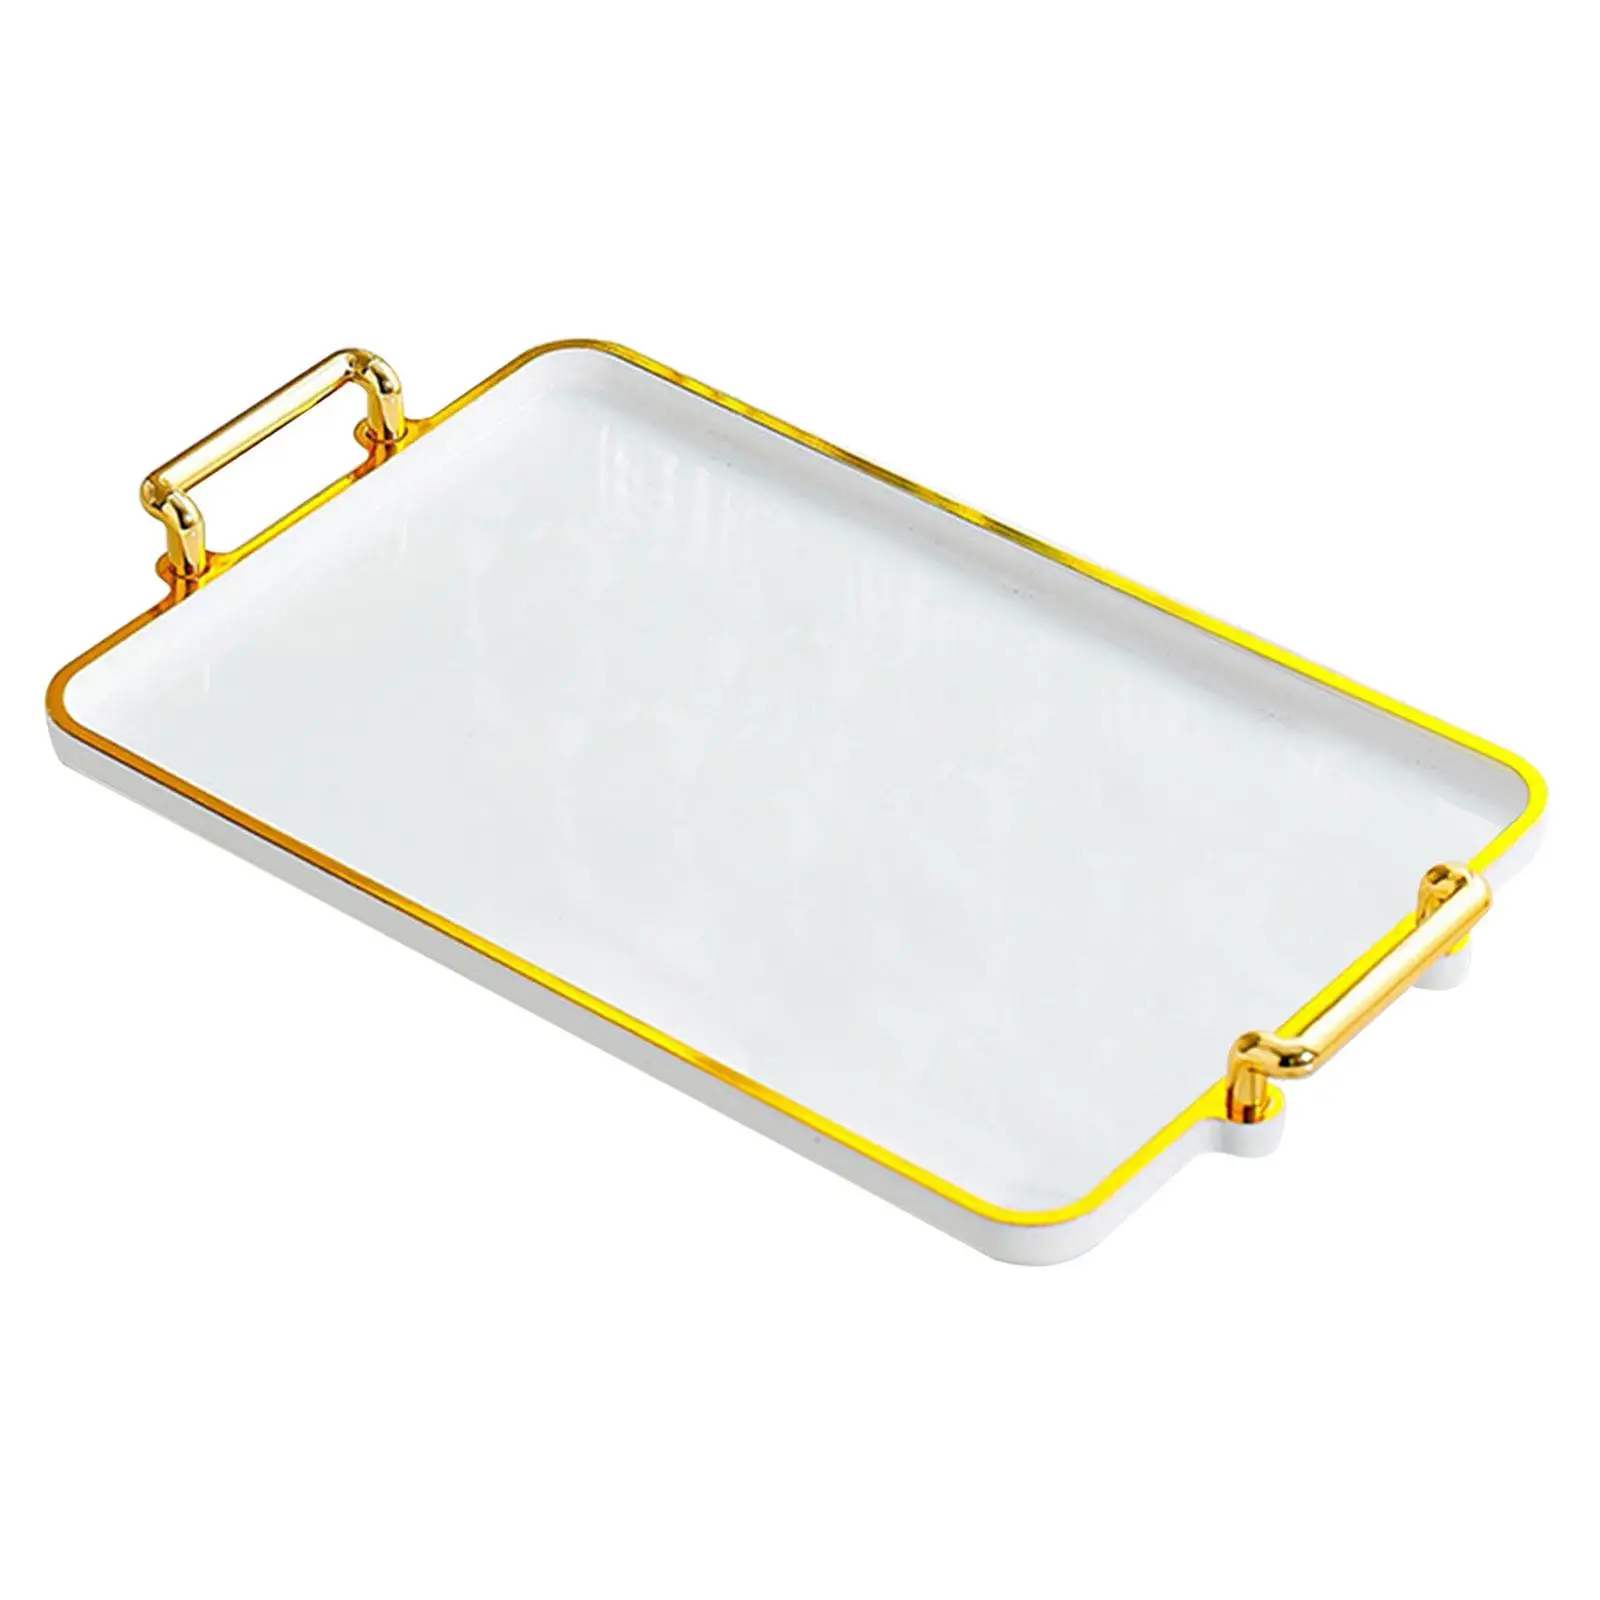 Serving Tray with Handles Eating Tray Cosmetic Storage Decorative Tray